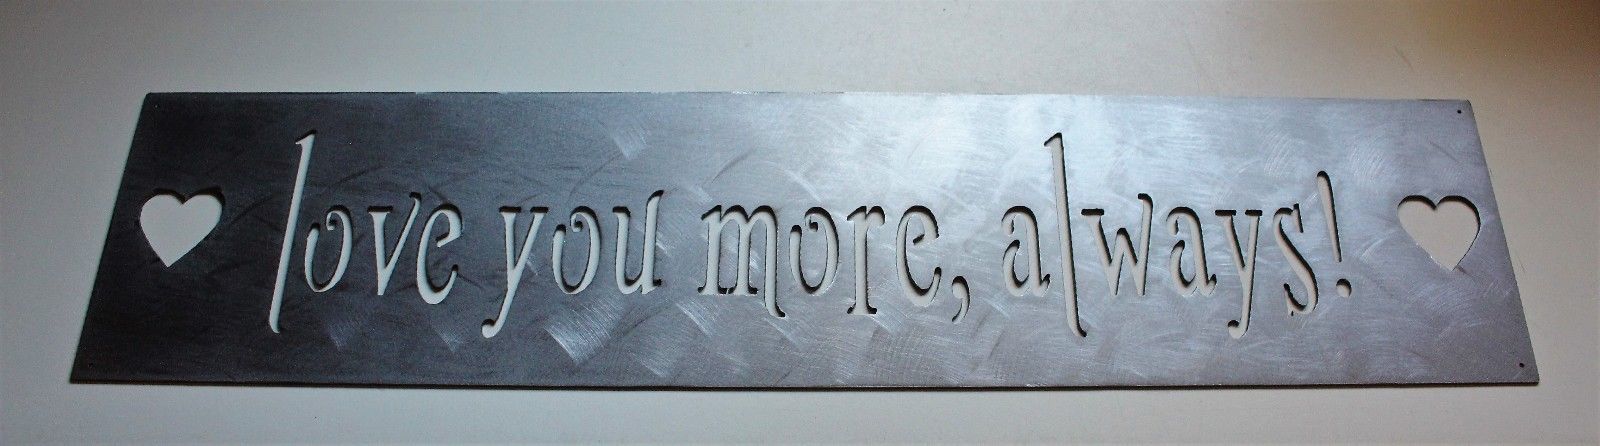 Love You More, Always -- Sign Metal Wall Decor 26" x 6" Matte Silver - $36.08